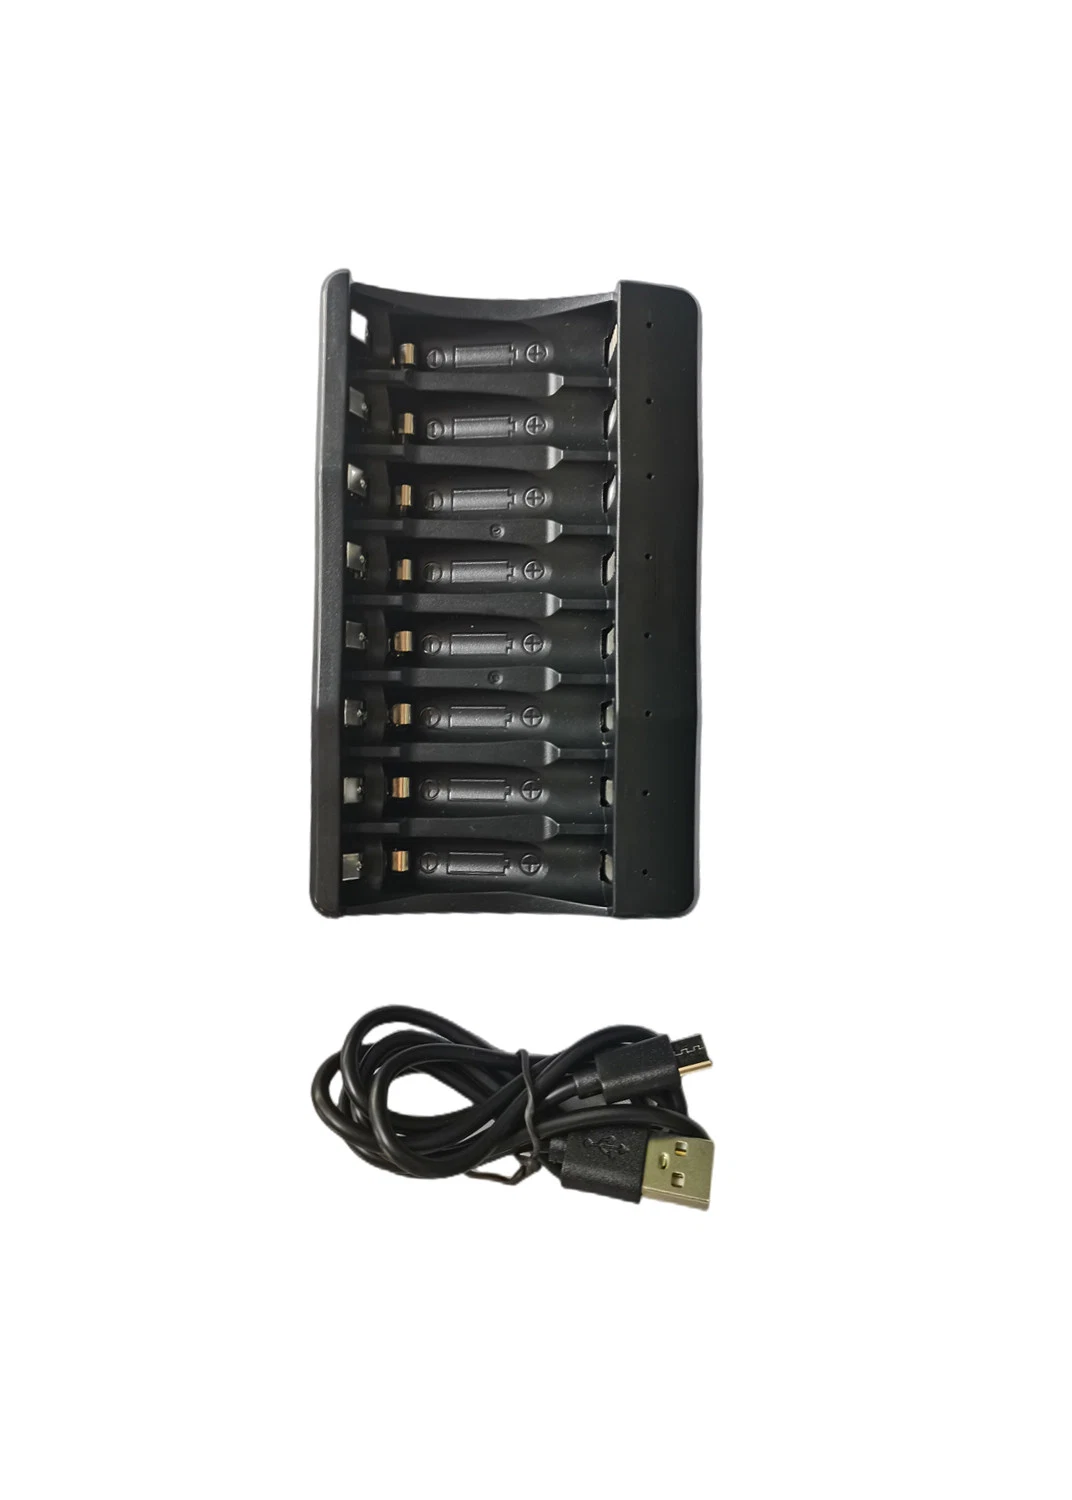 Fast Charging Universal NiMH 8 Slots Type C 1.2V AA AAA Ni-MH Ni-CD Smart Rechargeable USB Battery Charger